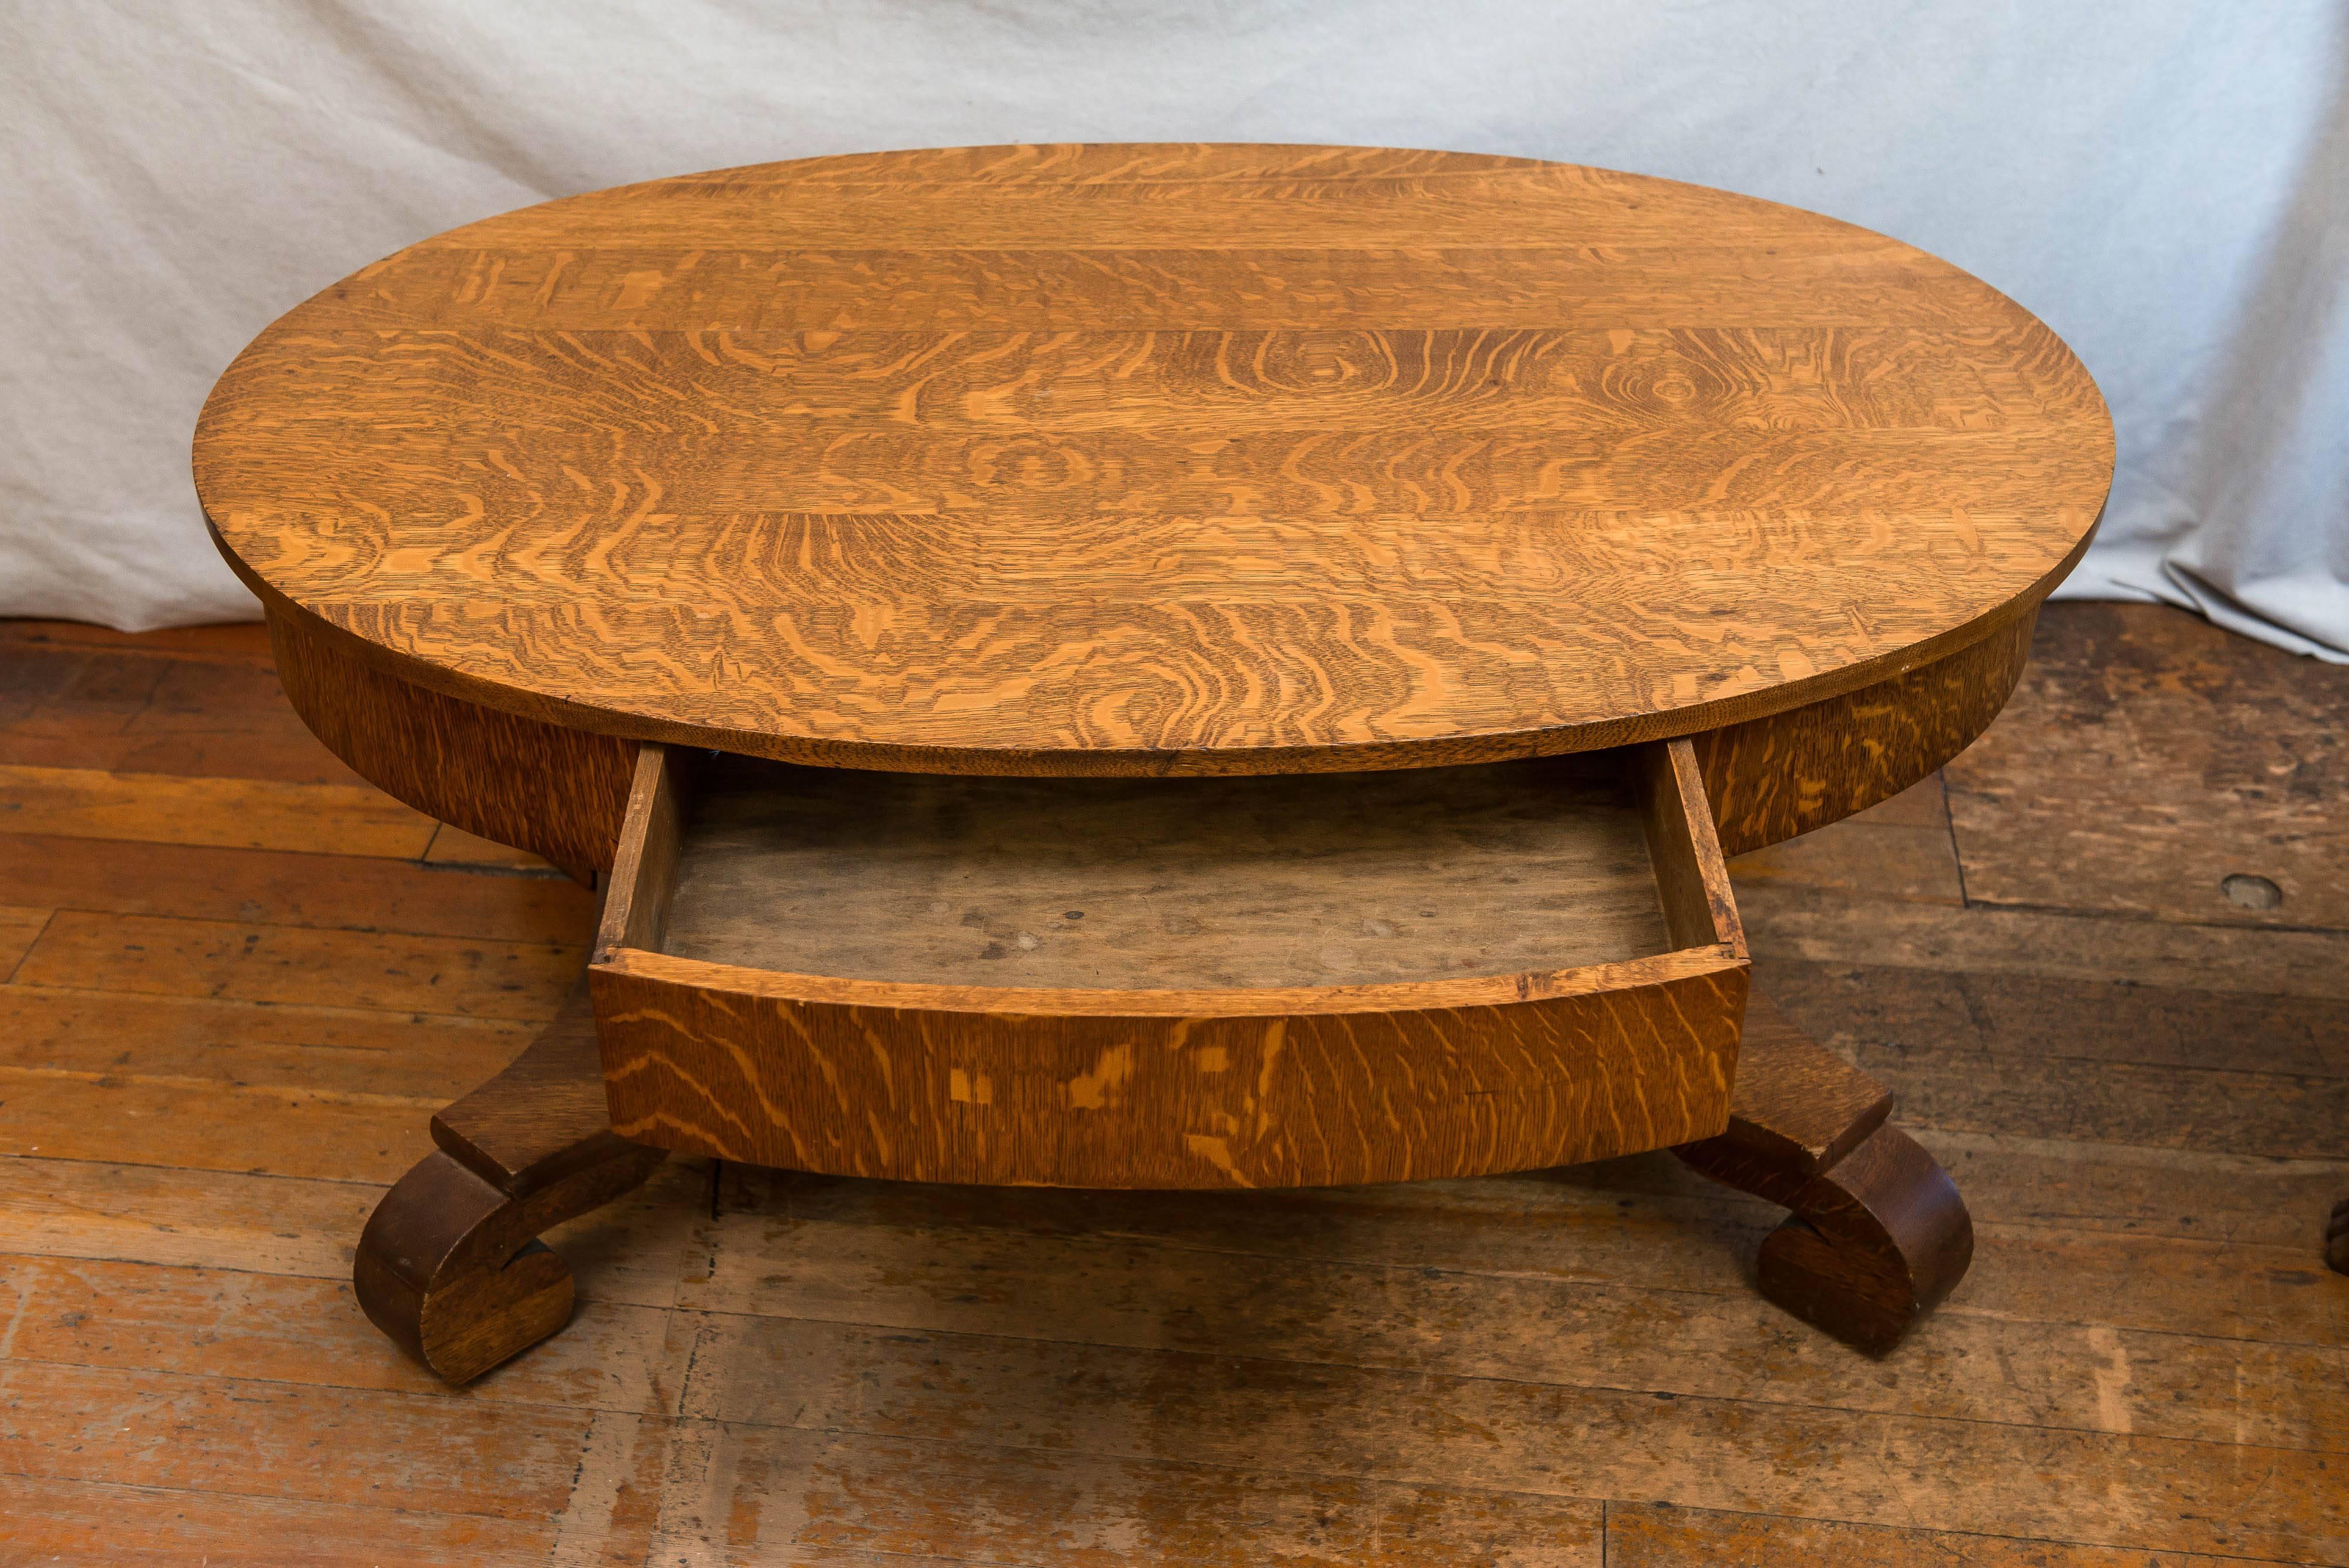 Hand-Crafted Antique Quarter Sawn American Oak Coffee Table